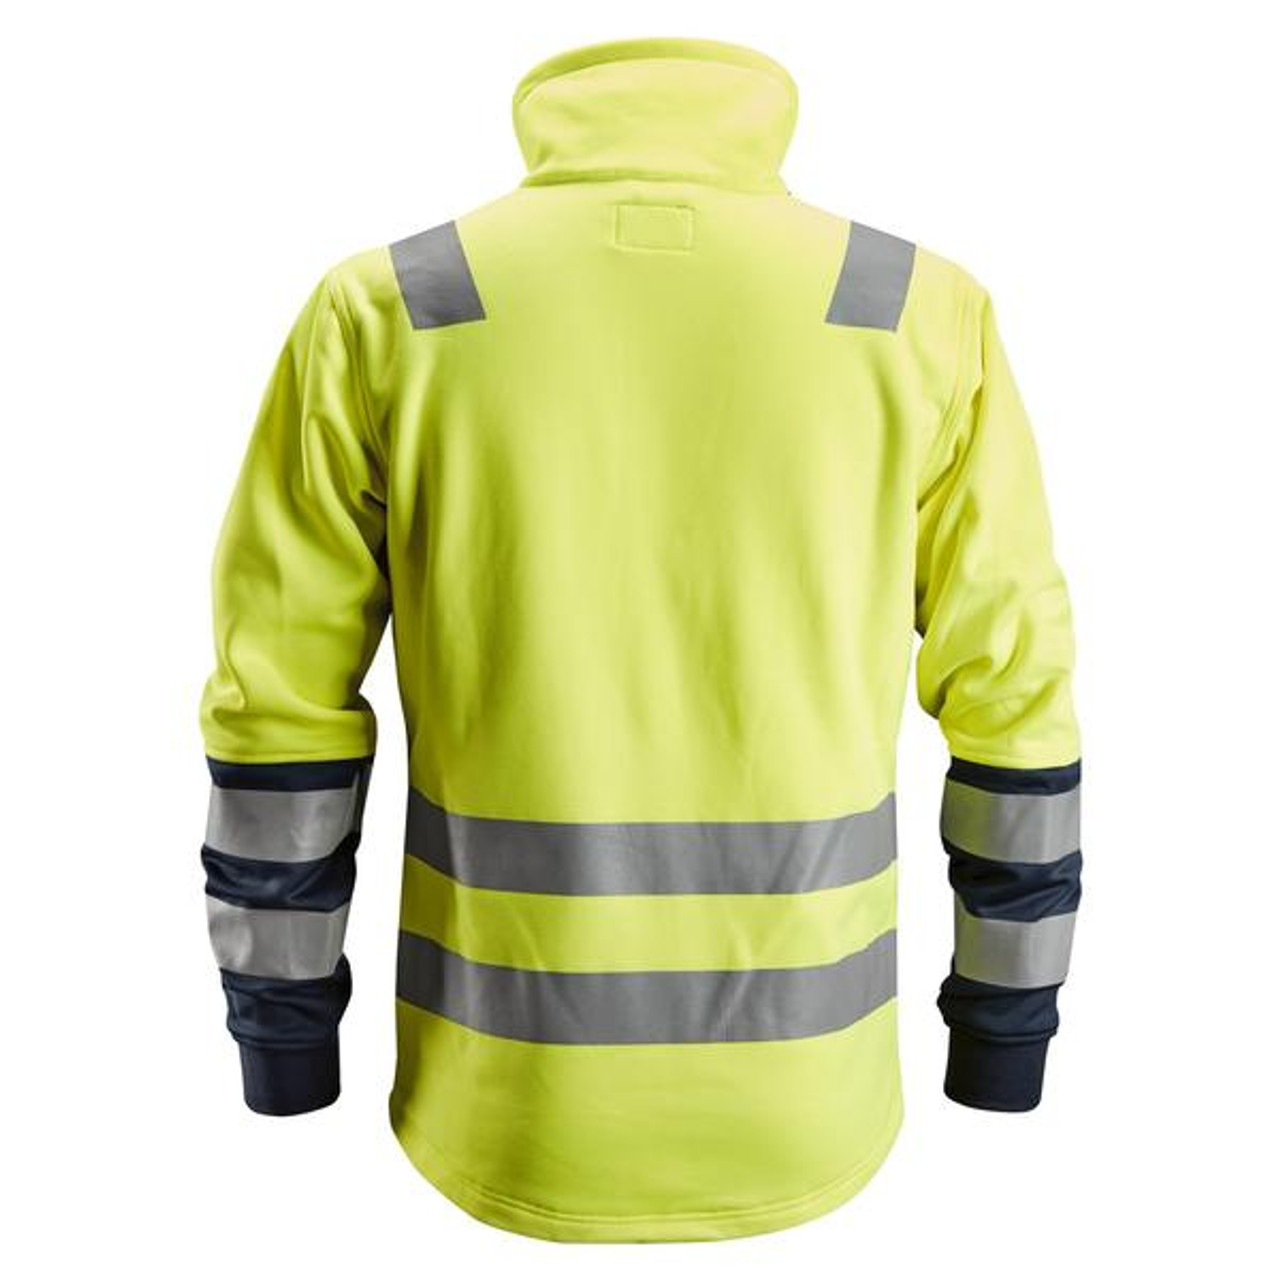 SNICKERS Jacket  8035 with  for SNICKERS Jacket | 8035 High Vis Yellow / Navy Blue Full Zip Jacket  in Reflective Tape Polyester that have Full Zip  available in Australia and New Zealand